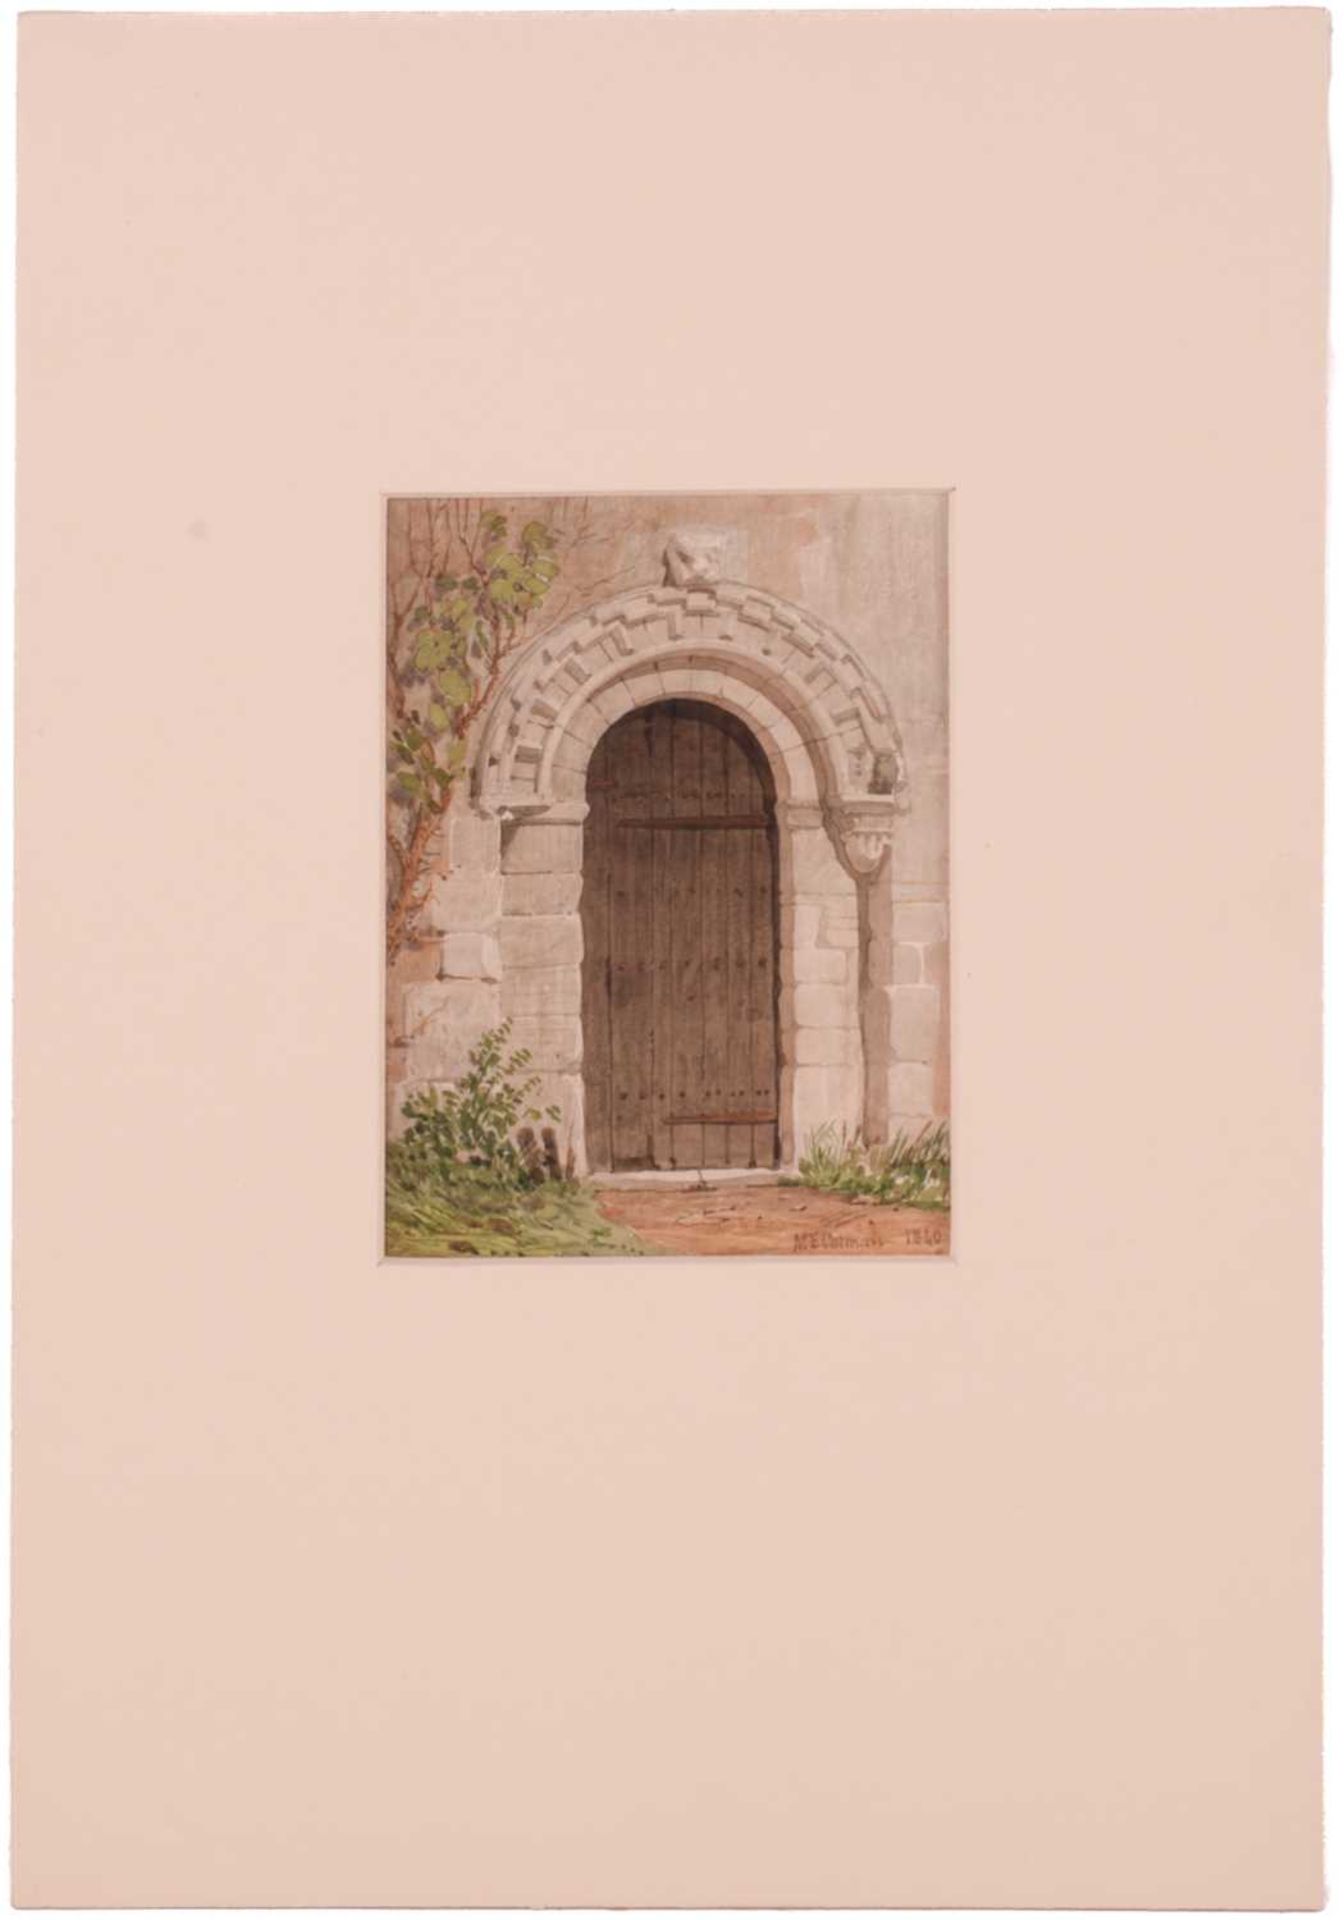 Miles Edmund Cotman (1810 - 1858), 'Framlingham Earl Church', signed and dated 1840, watercolour,